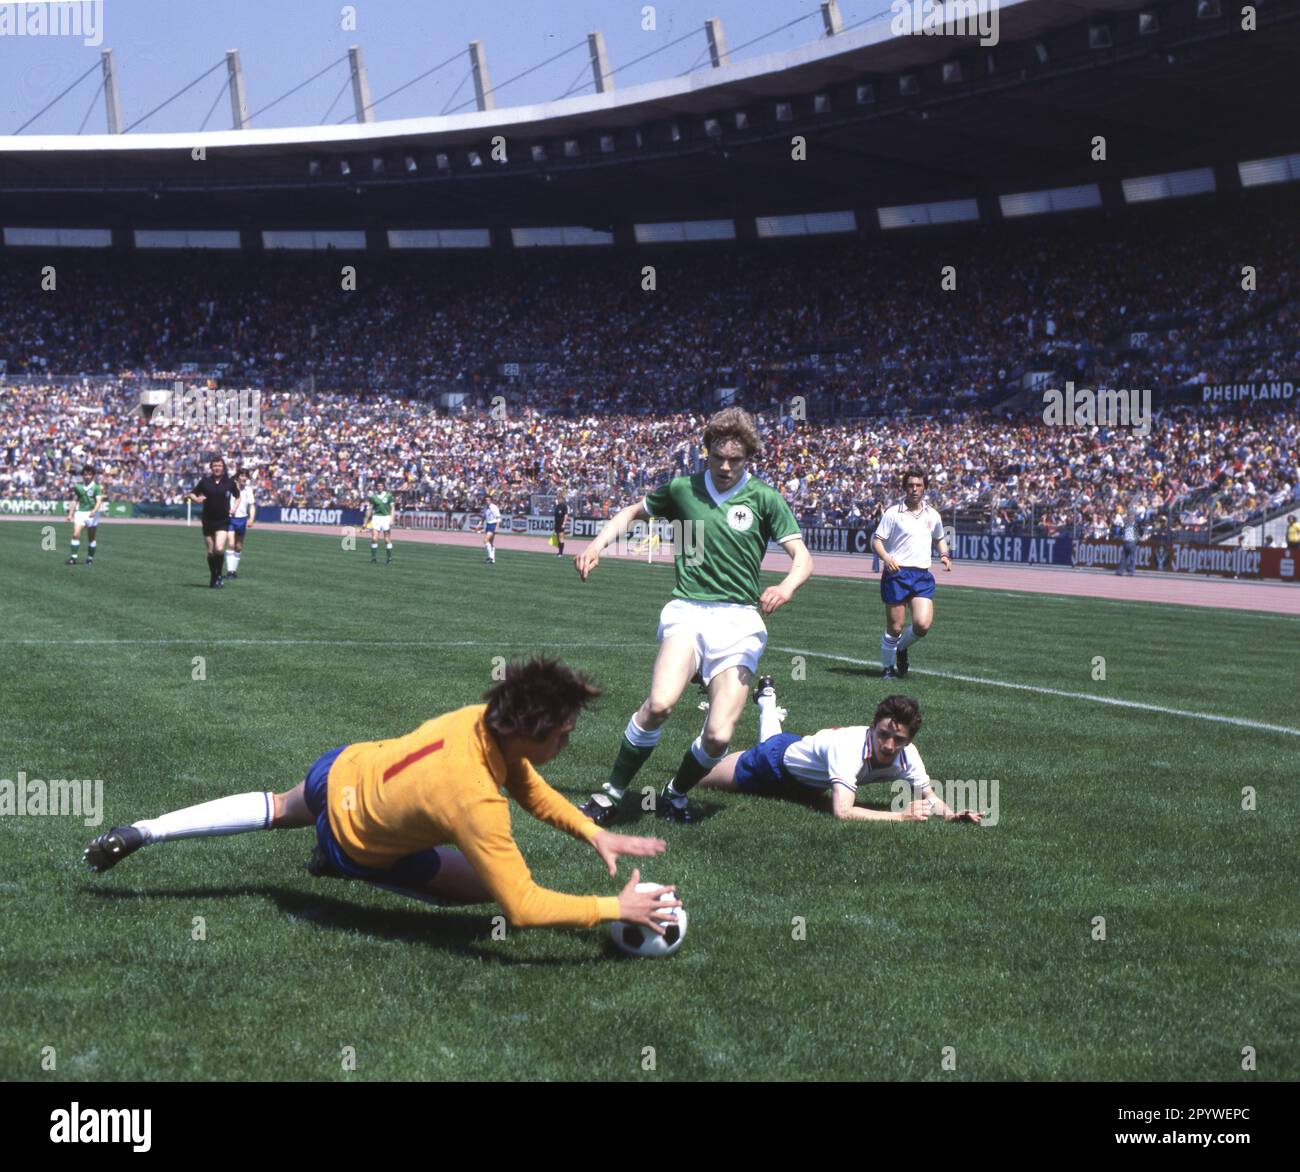 International student match: Germany - England 15.05.1979 at the Rheinstadion in Düsseldorf. Ludger Winkel (Germany) in front of goalkeeper Lowe (England). [automated translation] Stock Photo